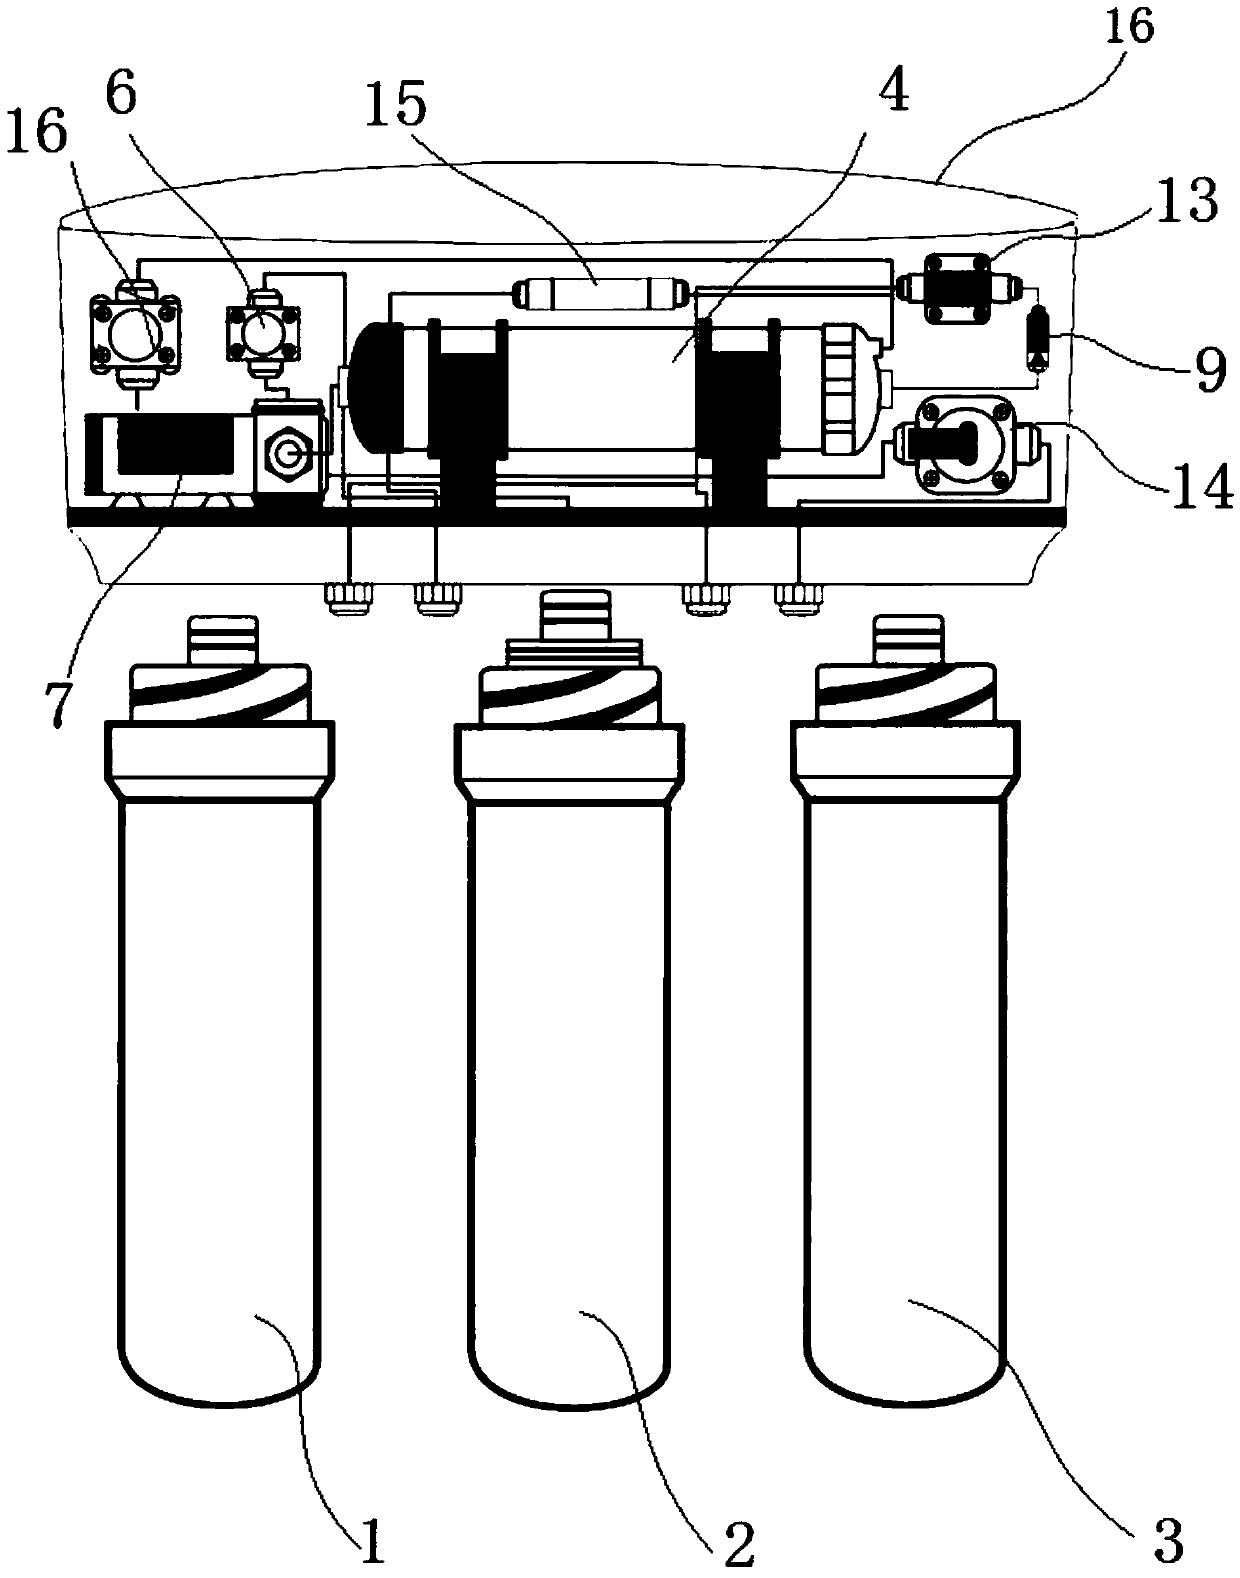 Small and integrated reverse osmosis water purifier